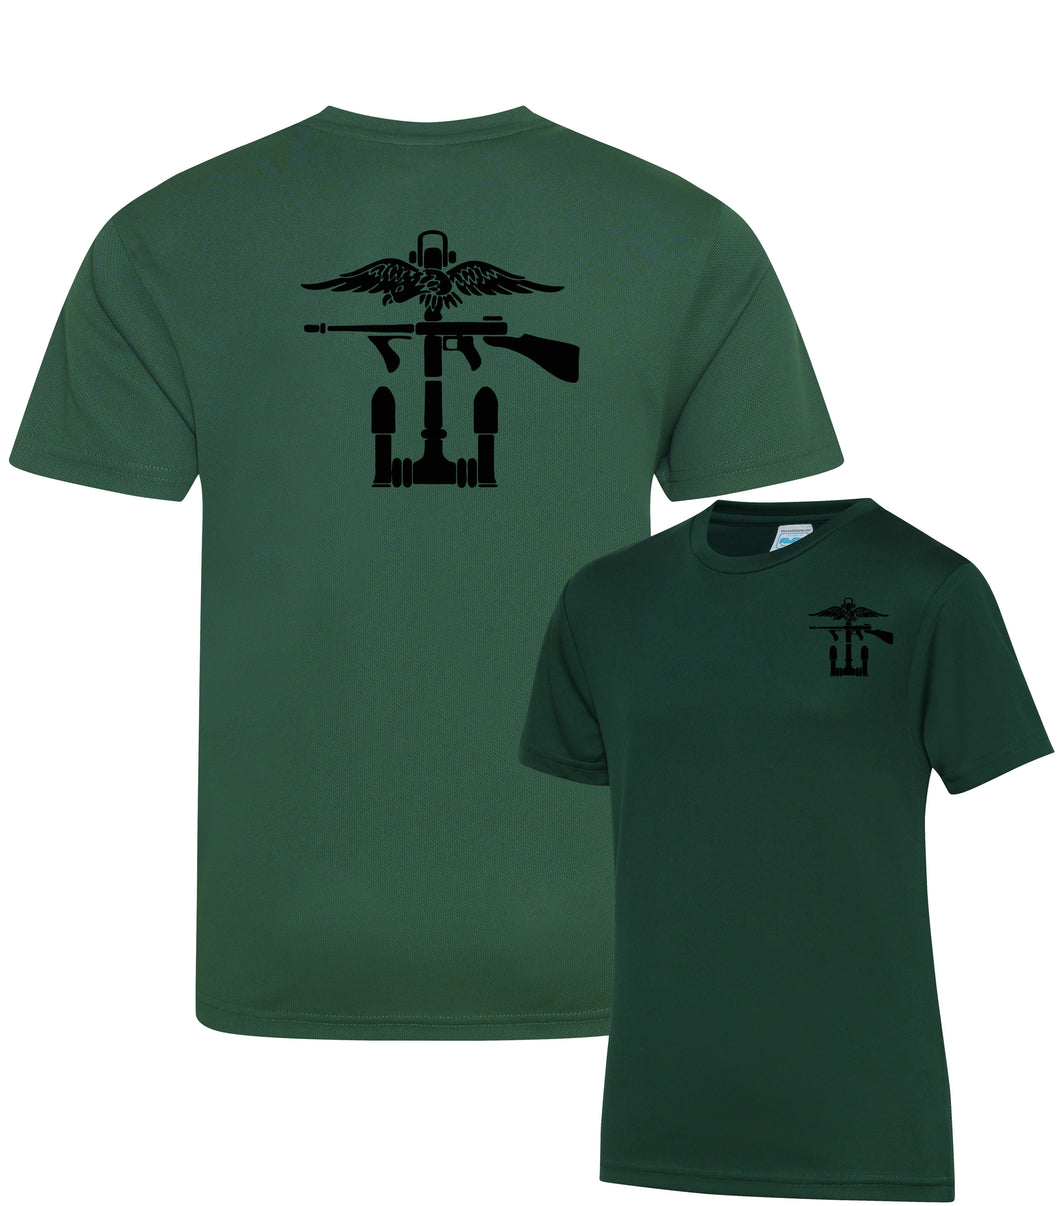 Combined Operations / Joint Force - Fully Printed Wicking Fabric T-shirt